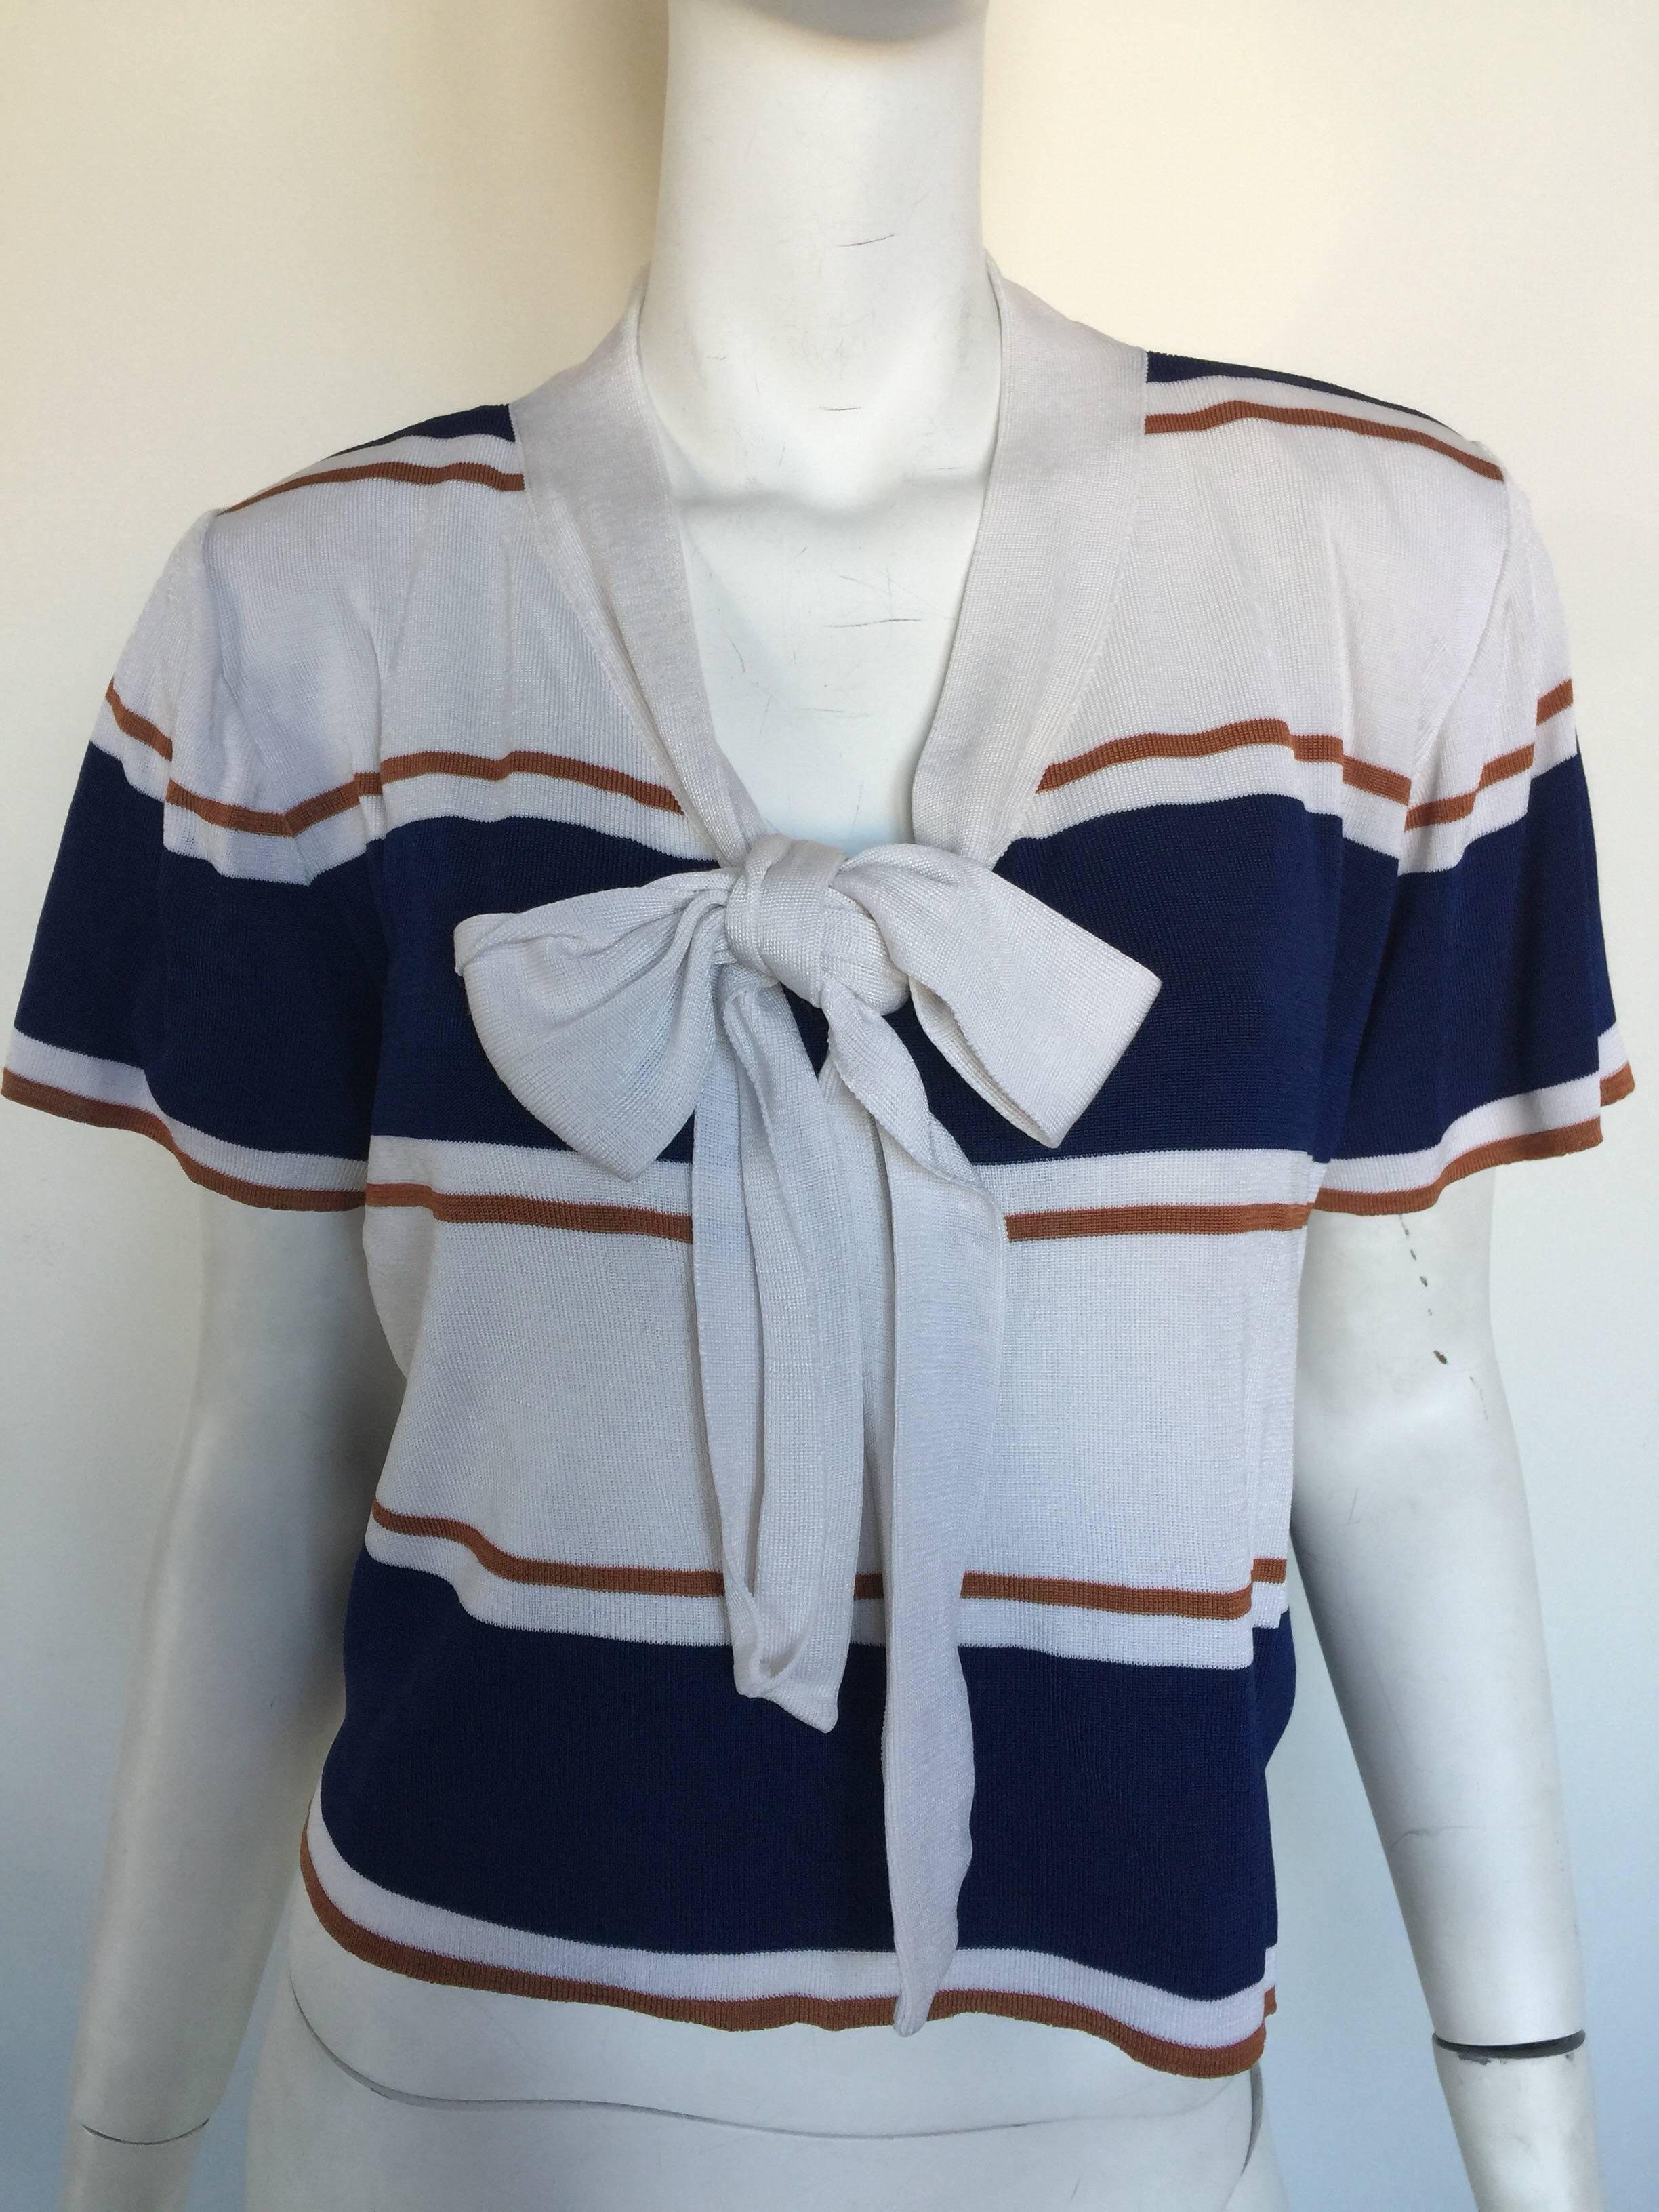 This lightweight Givenchy knit has navy and Carmel color stripes.  It is slightly cropped with a bow tie in the front.  